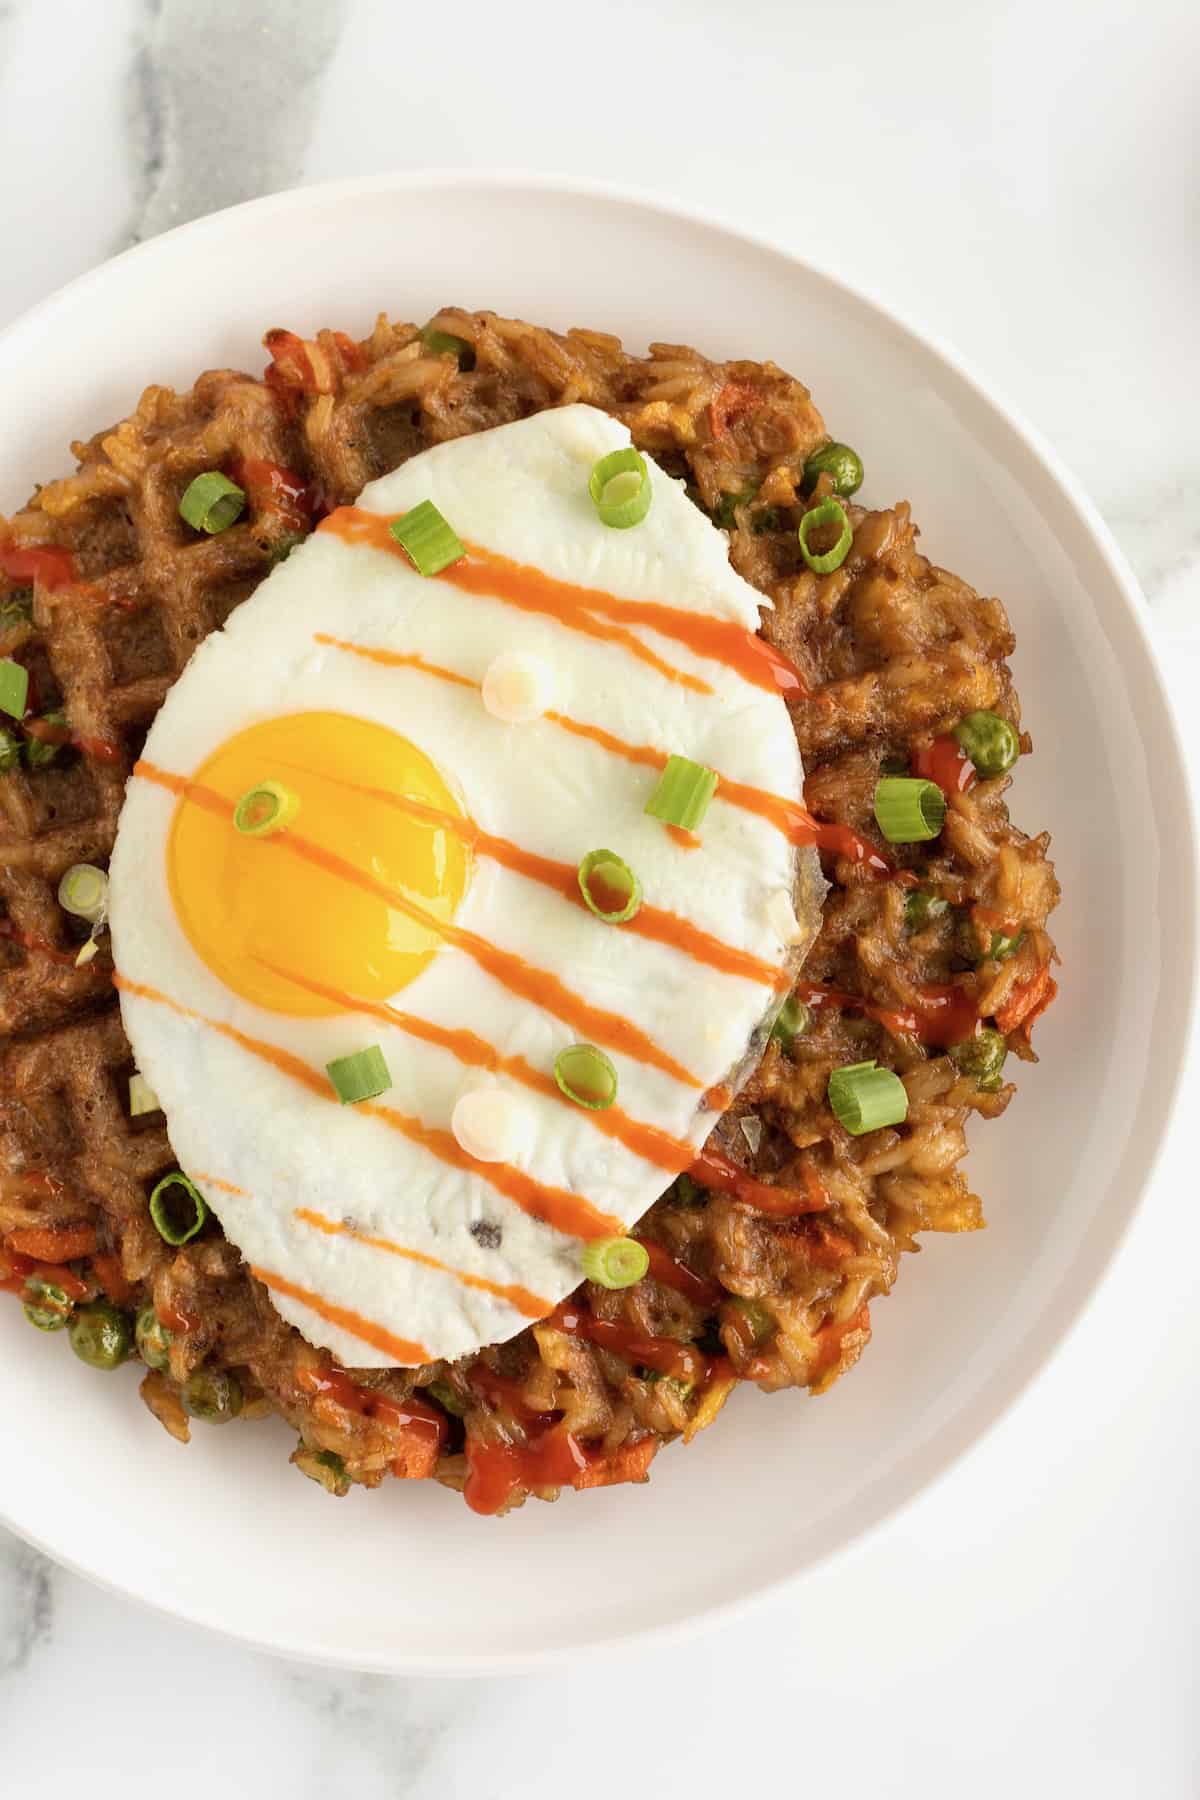 A sunny side up egg on top of a fried rice waffle on a white ceramic plate sprinkled with chopped green onion and drizzle with sriracha sauce.